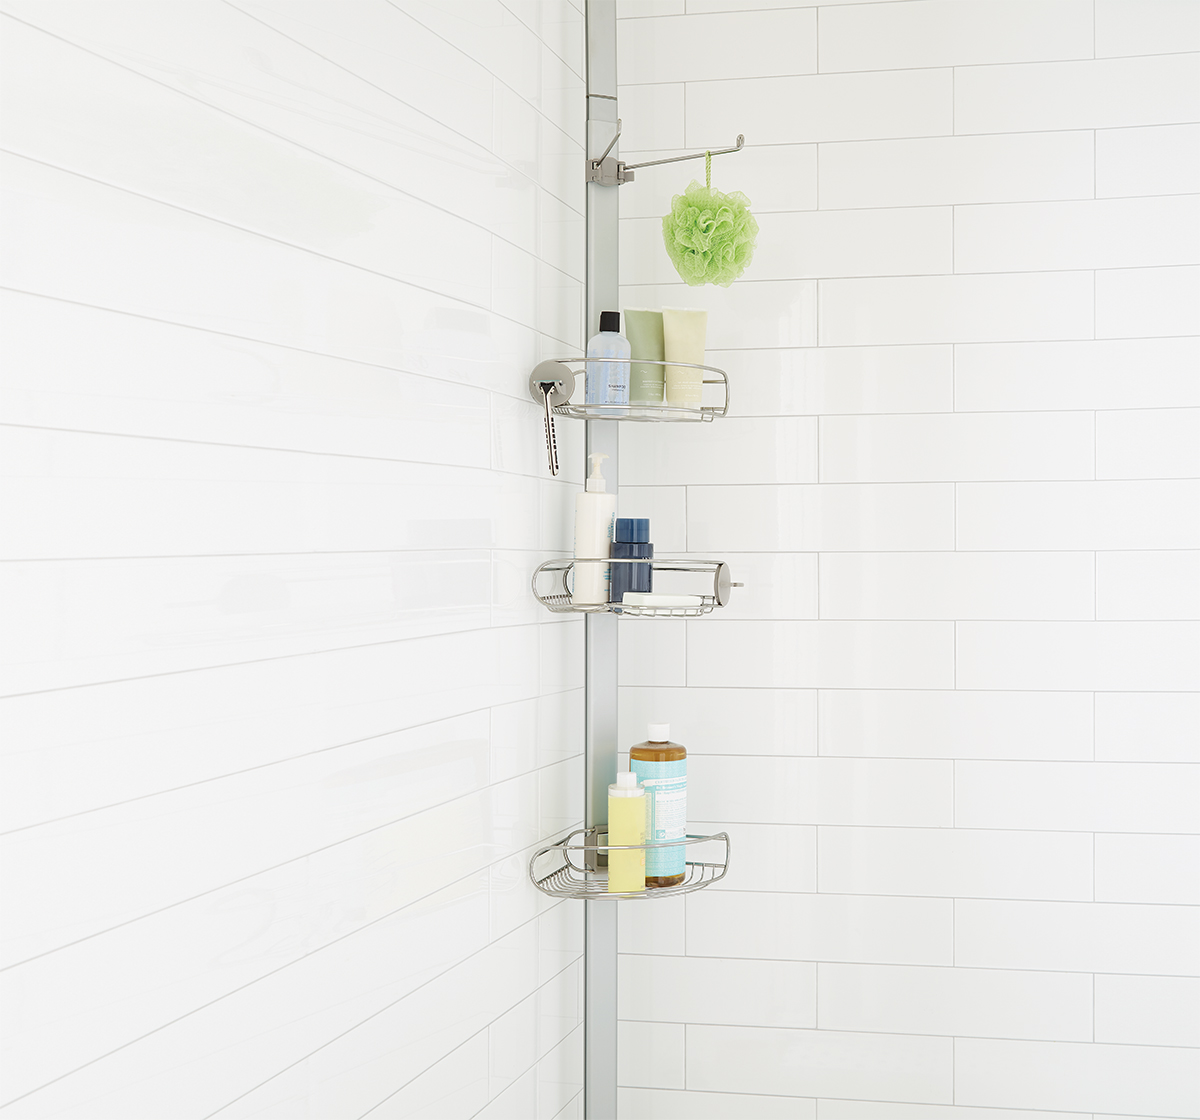 Corner Shower Caddy Tension Pole: Adjustable Stainless Steel